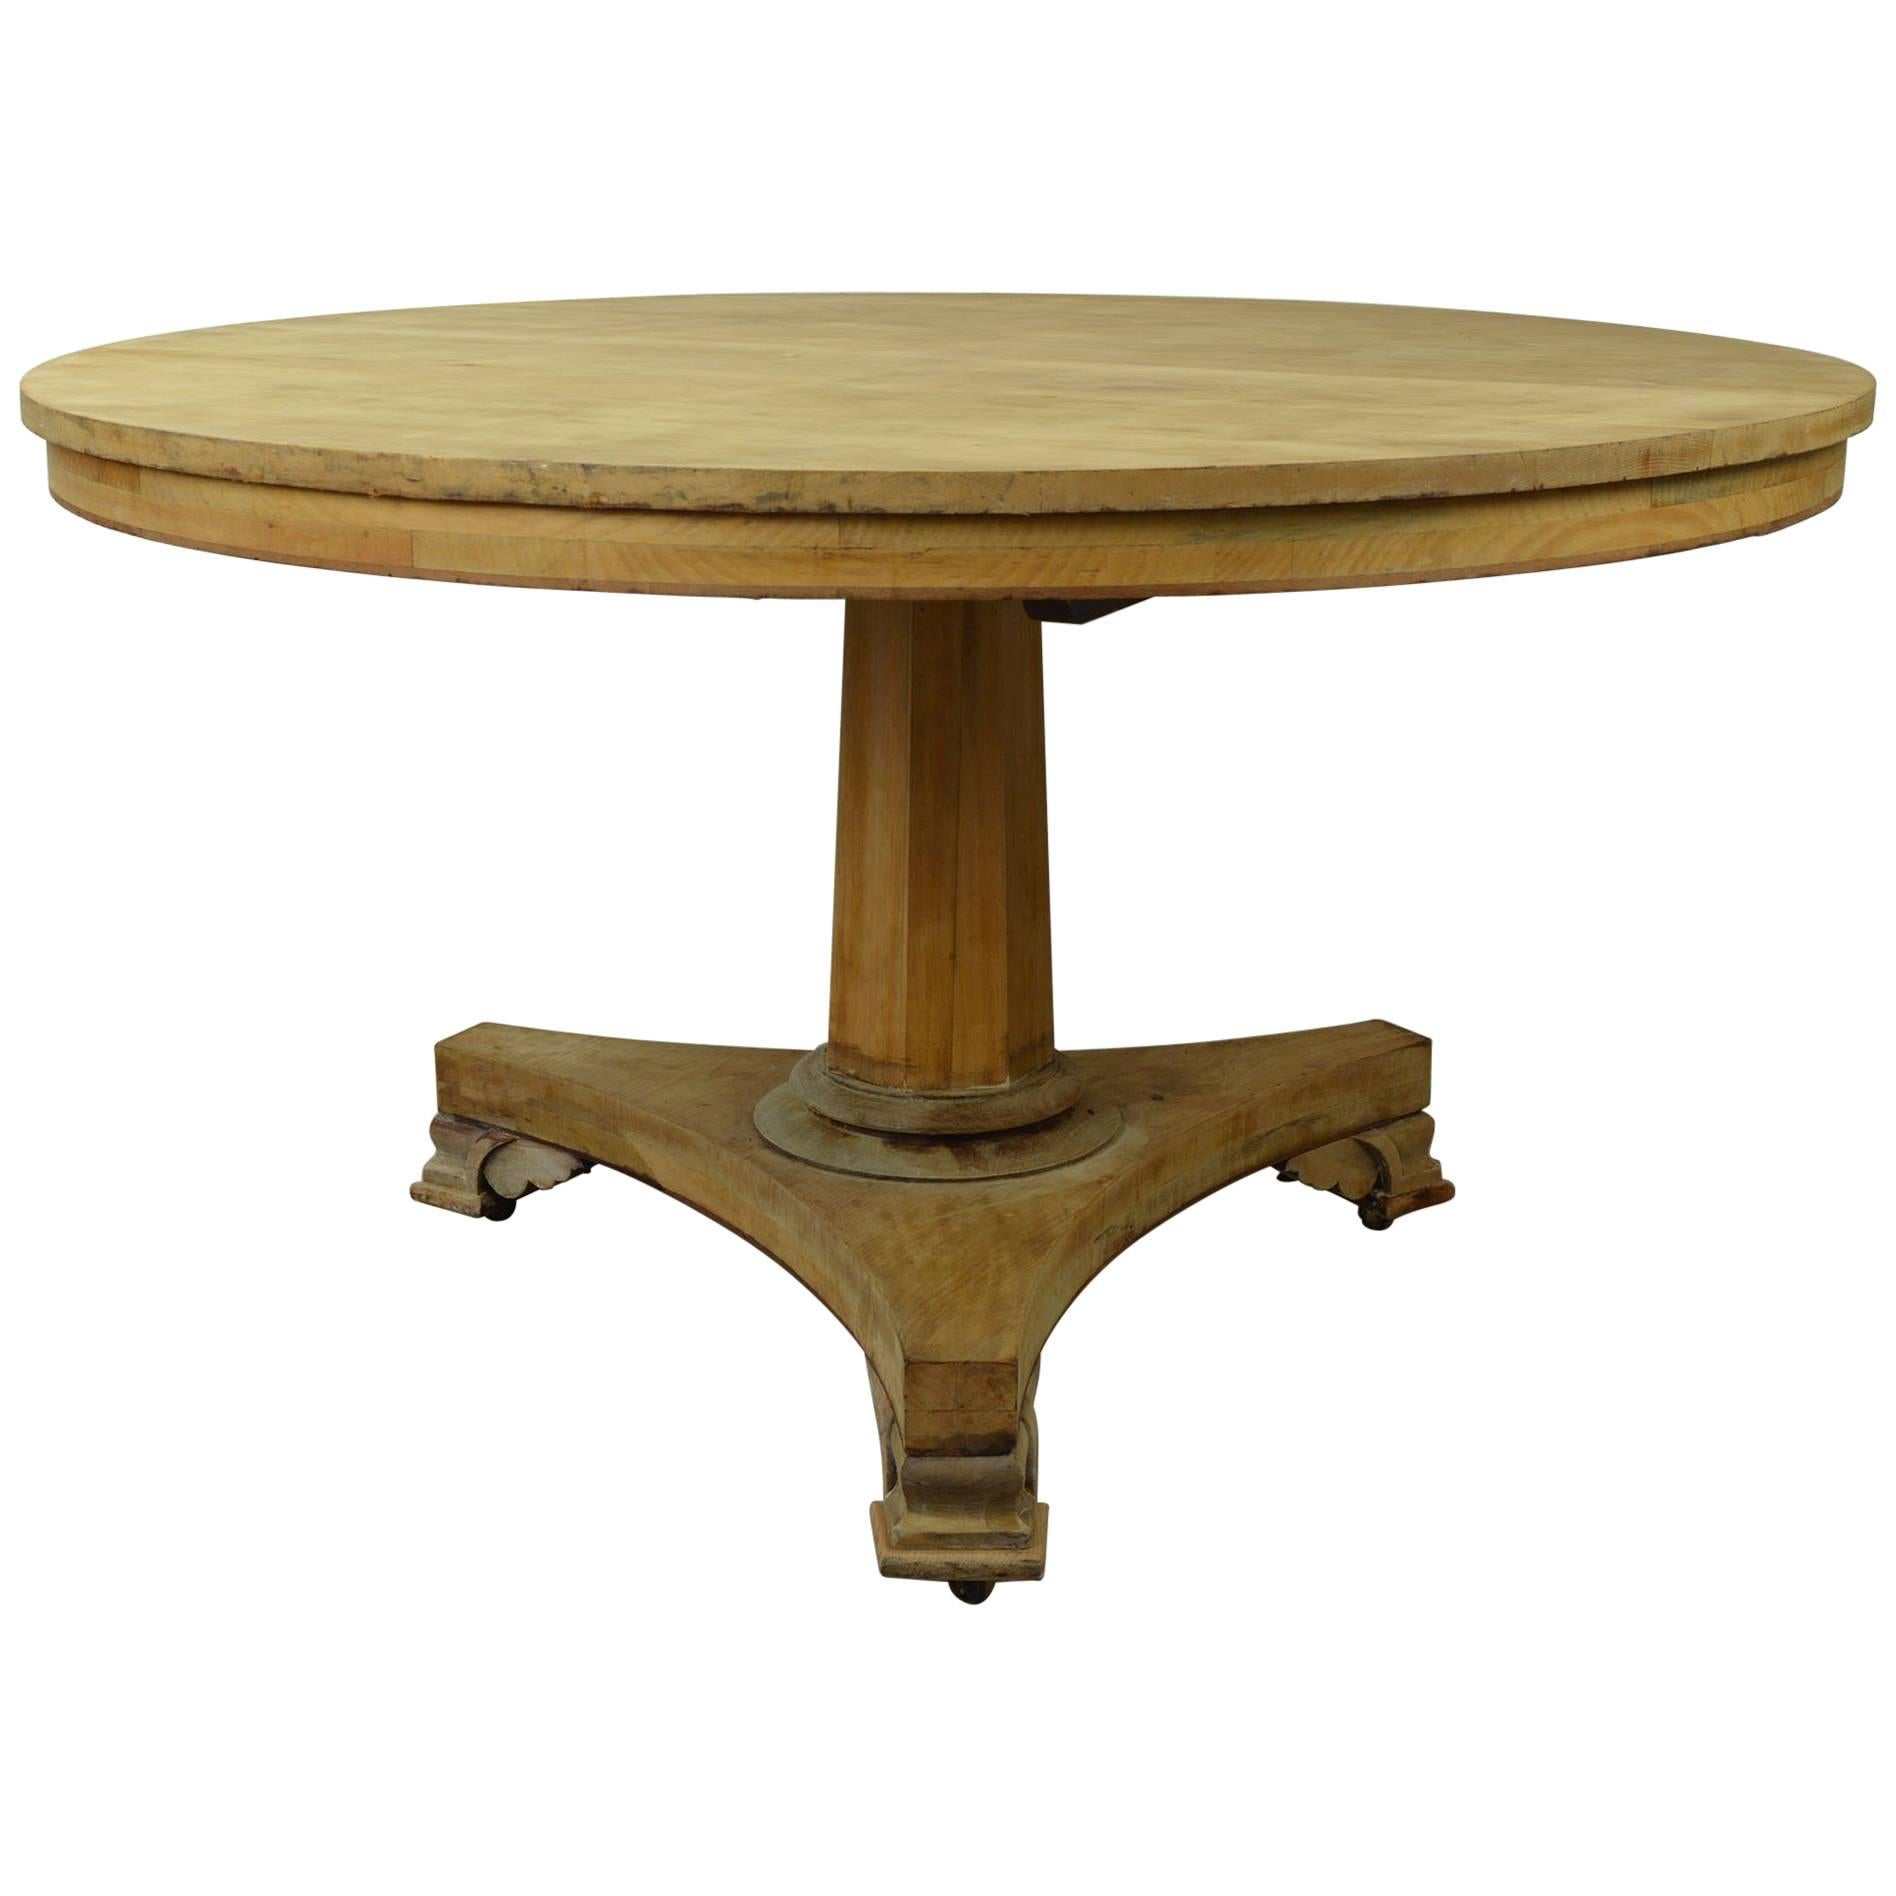 Large Round Antique Pine Dining Table, English Regency